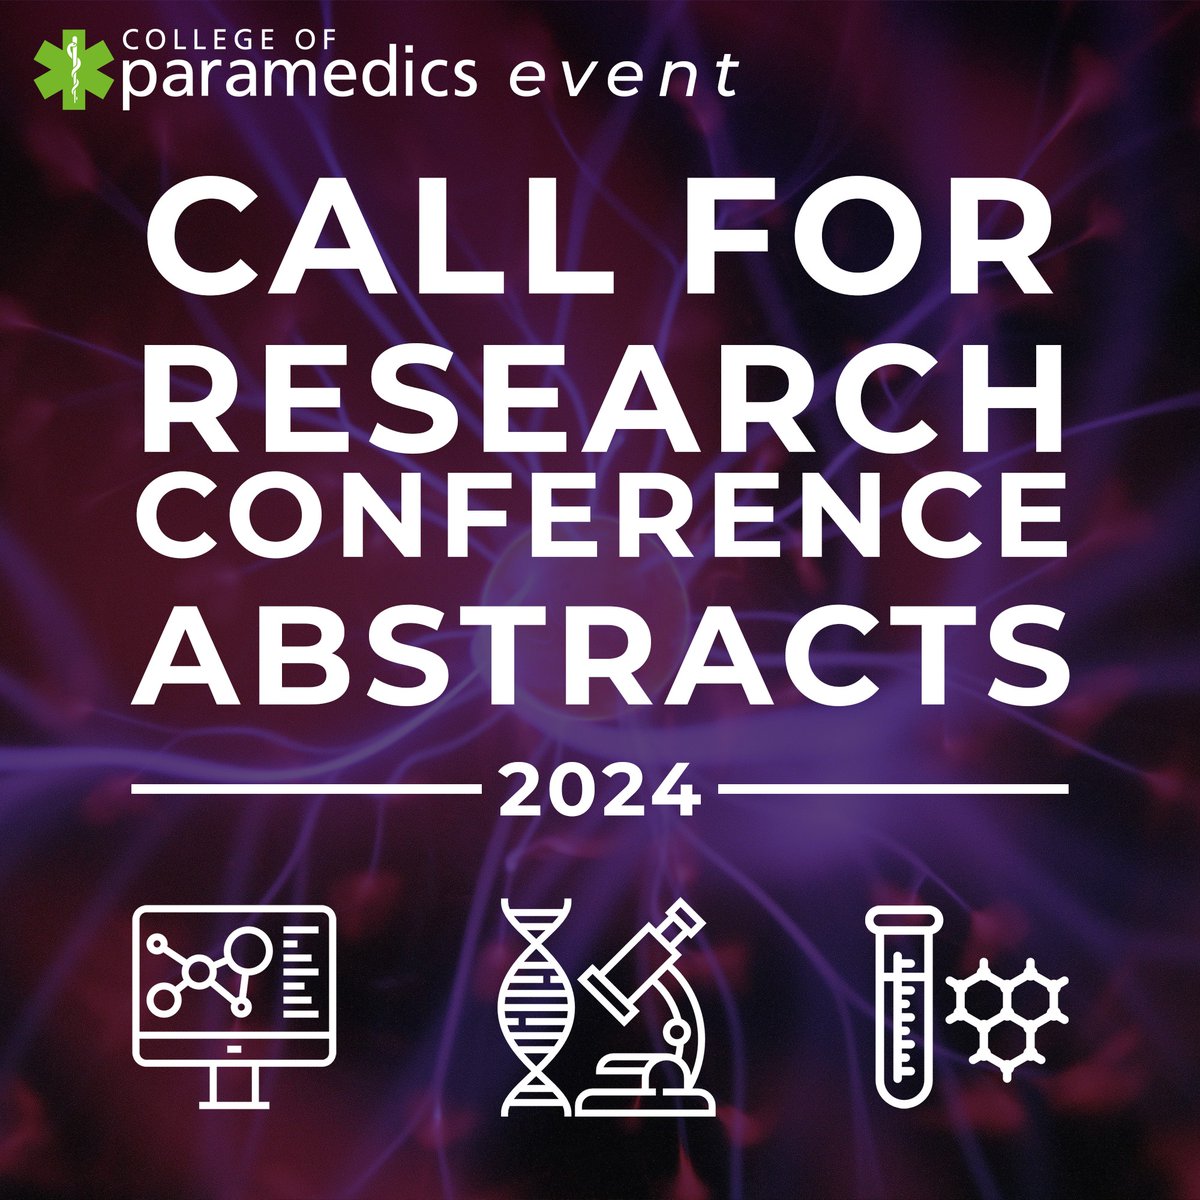 We are inviting you to submit abstracts for oral and poster presentations at the CoP Annual Research Conference, which takes place on 21 May 2024. More info and abstract submissions here 👉 bit.ly/48dJJxt #ParamedicsUK